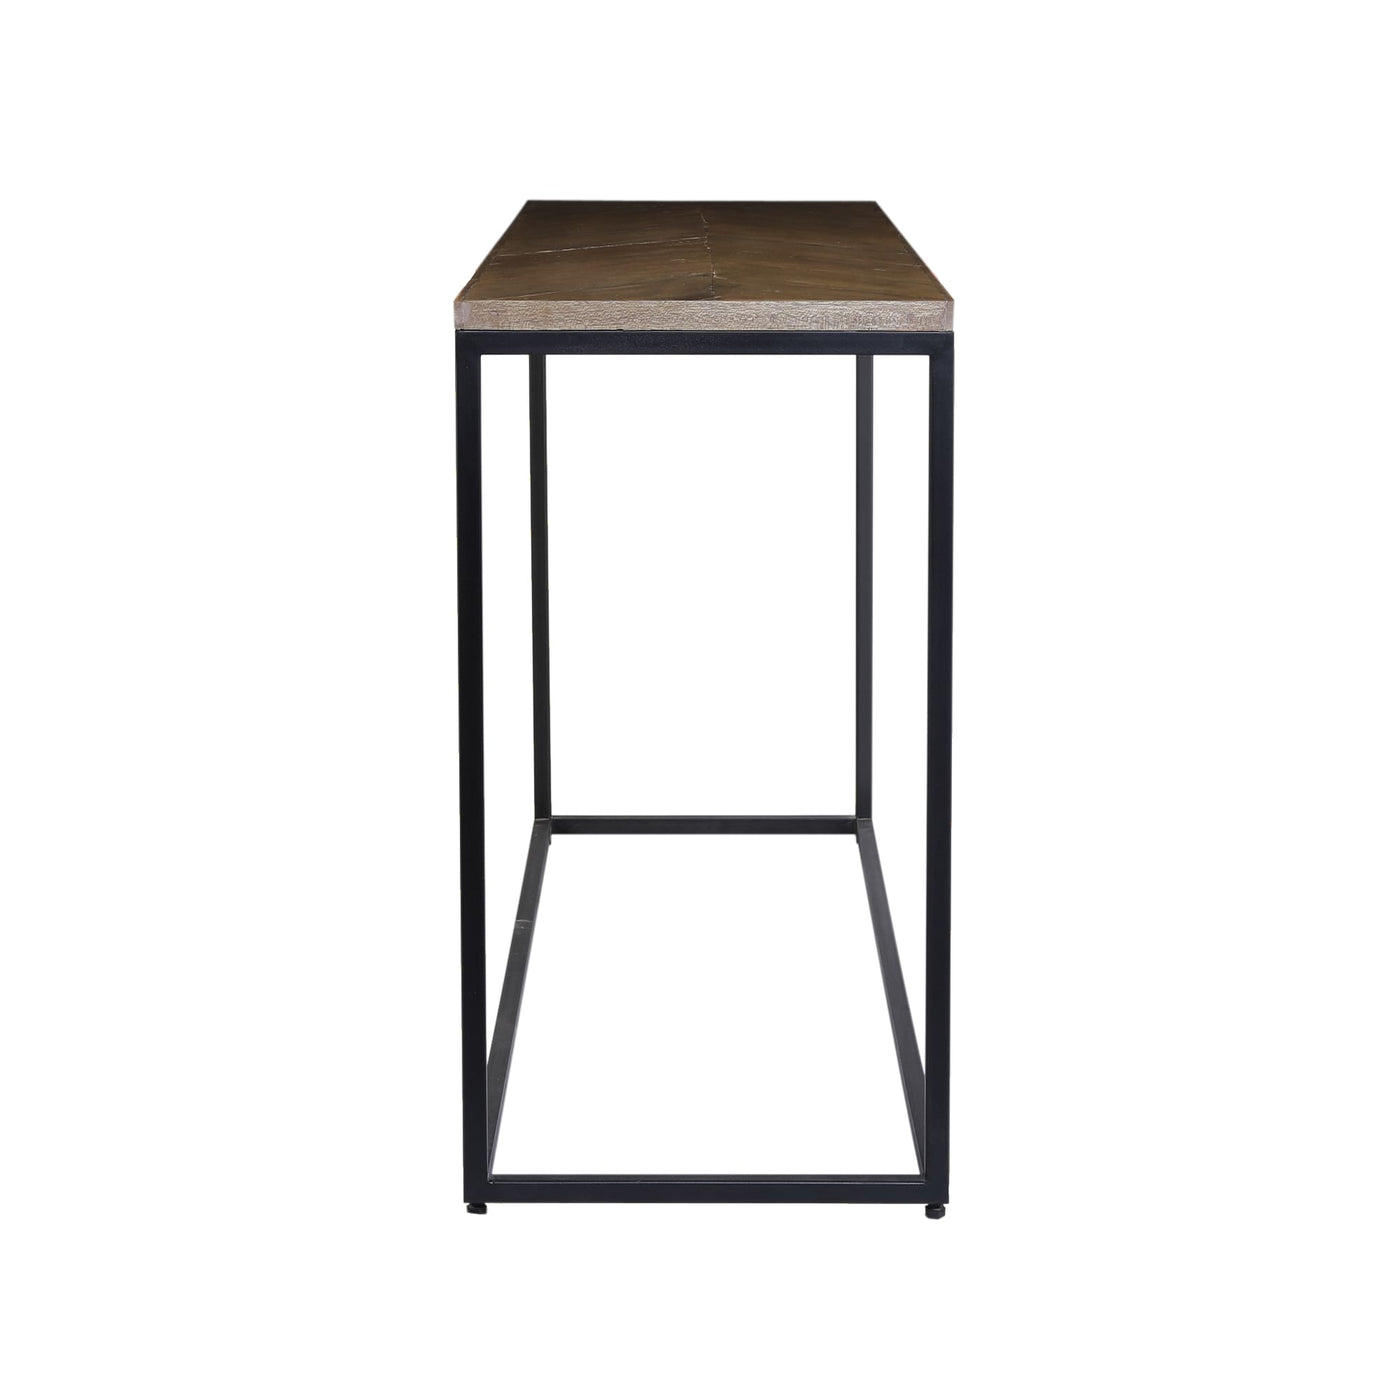 Fable Console Table